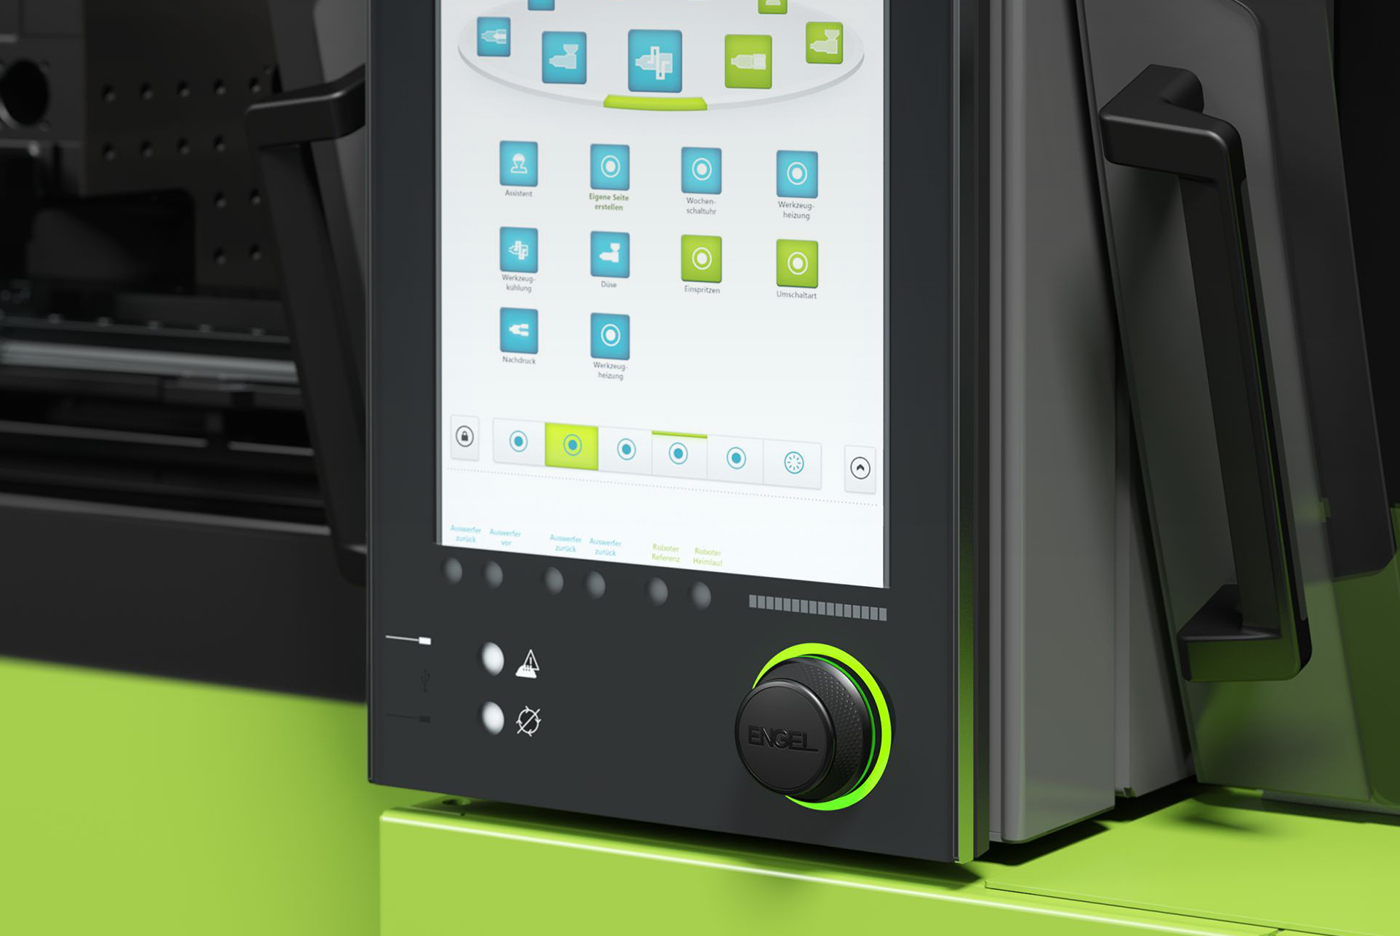 ENGEL CC300 close-up view of touchscreen control